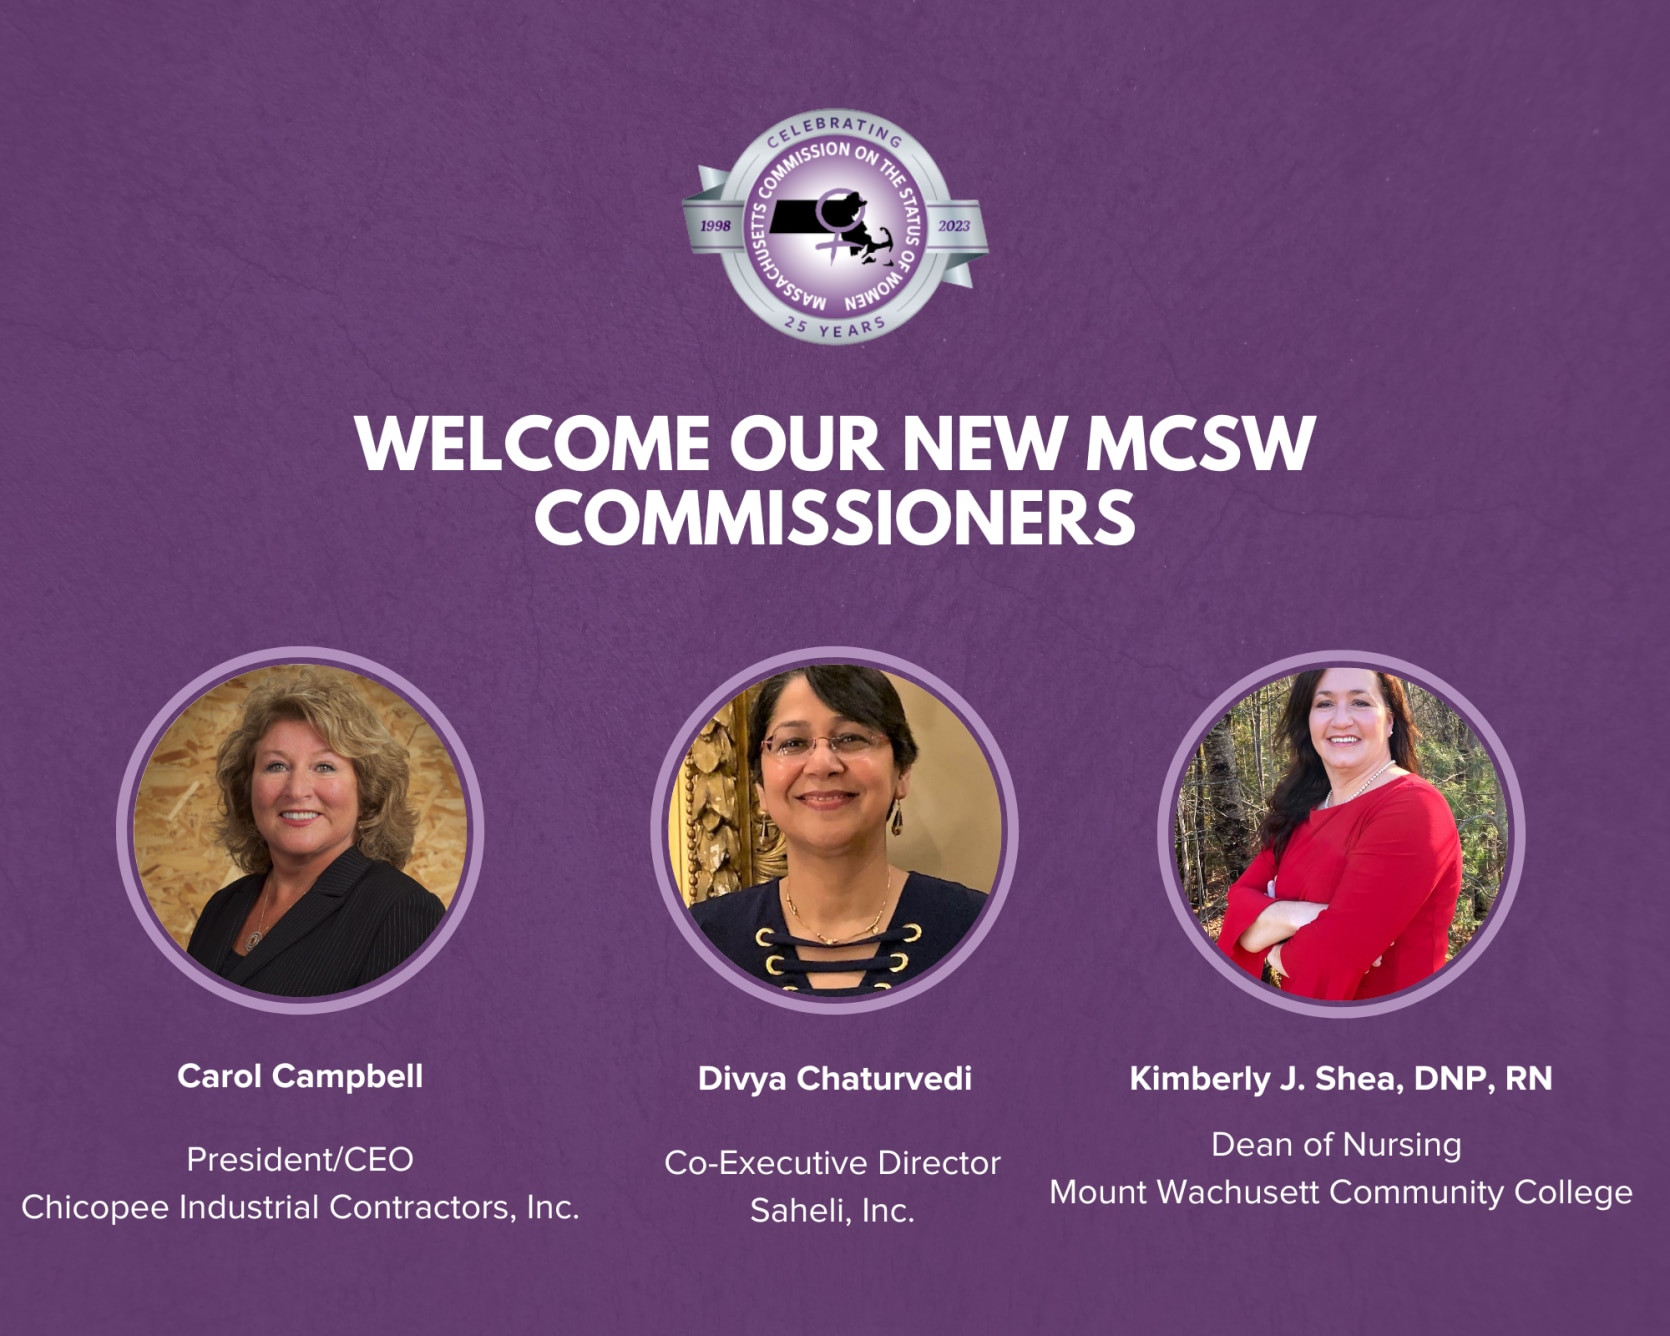 New MCSW Commissioners